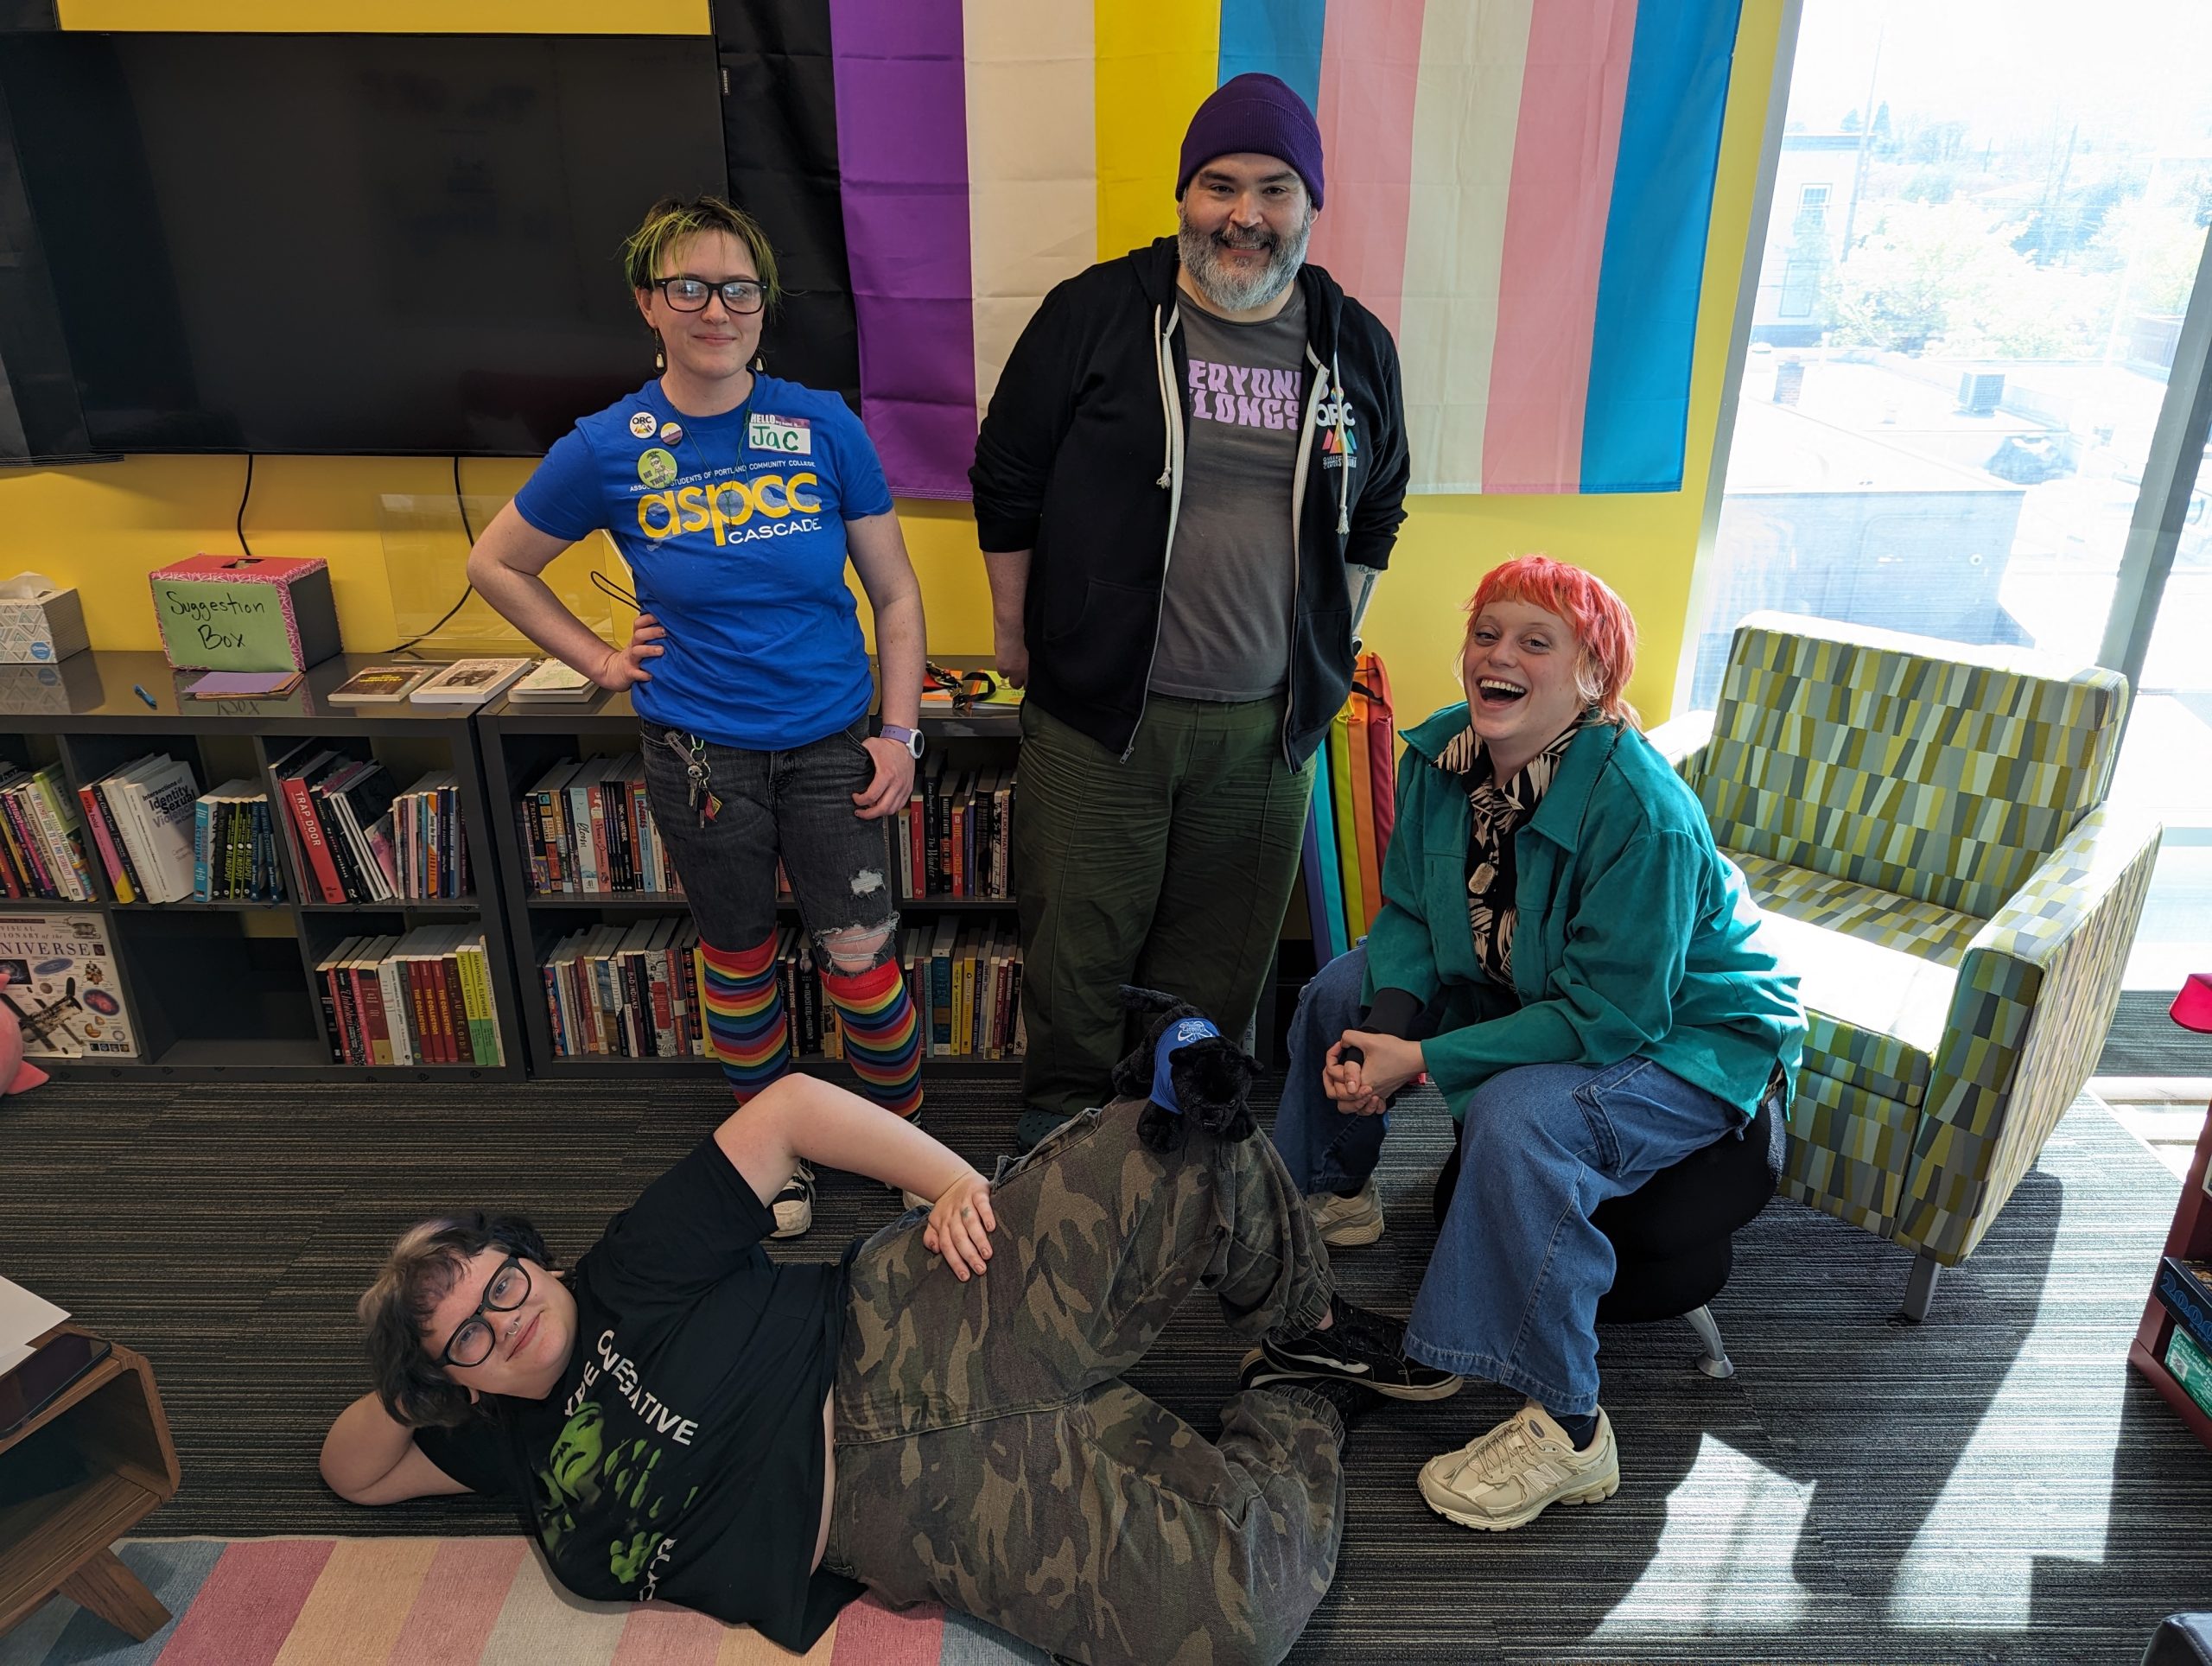 Four students, (two standing, one seated, and one lying on the floor) in front of a backdrop of rainbow flags